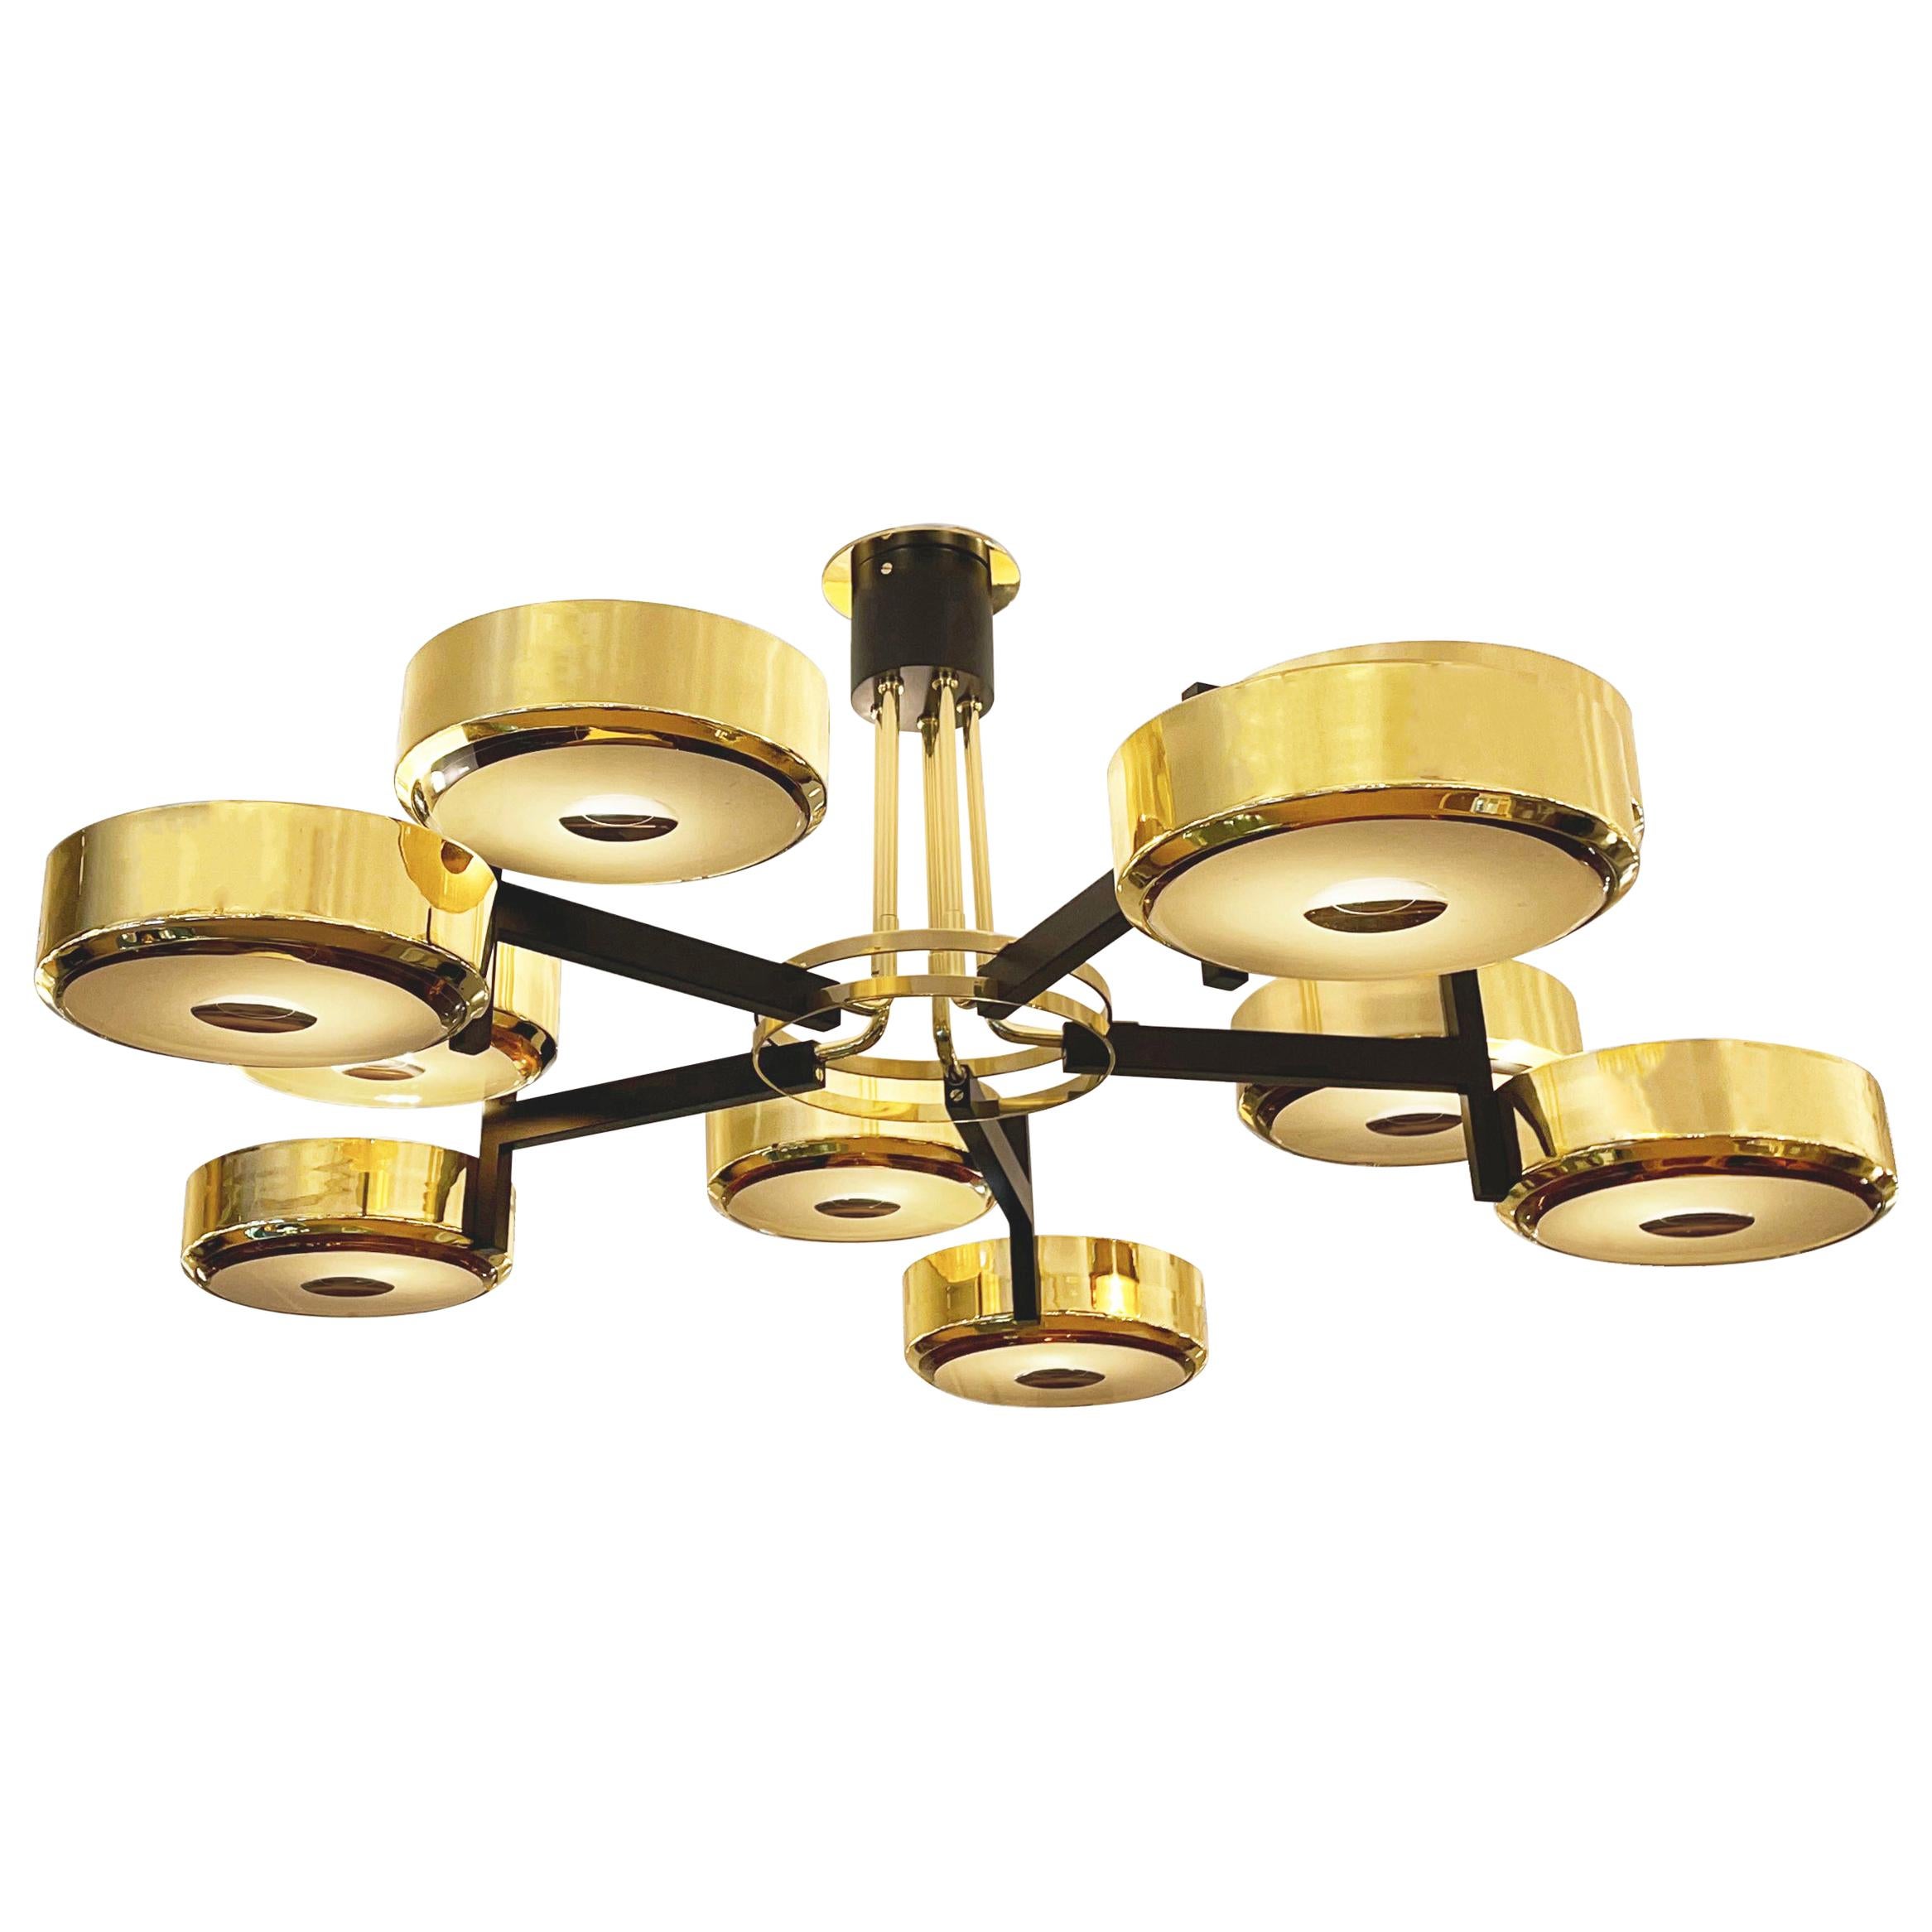 Eclissi Grande Ceiling Light by Gaspare Asaro. Carved Glass Version